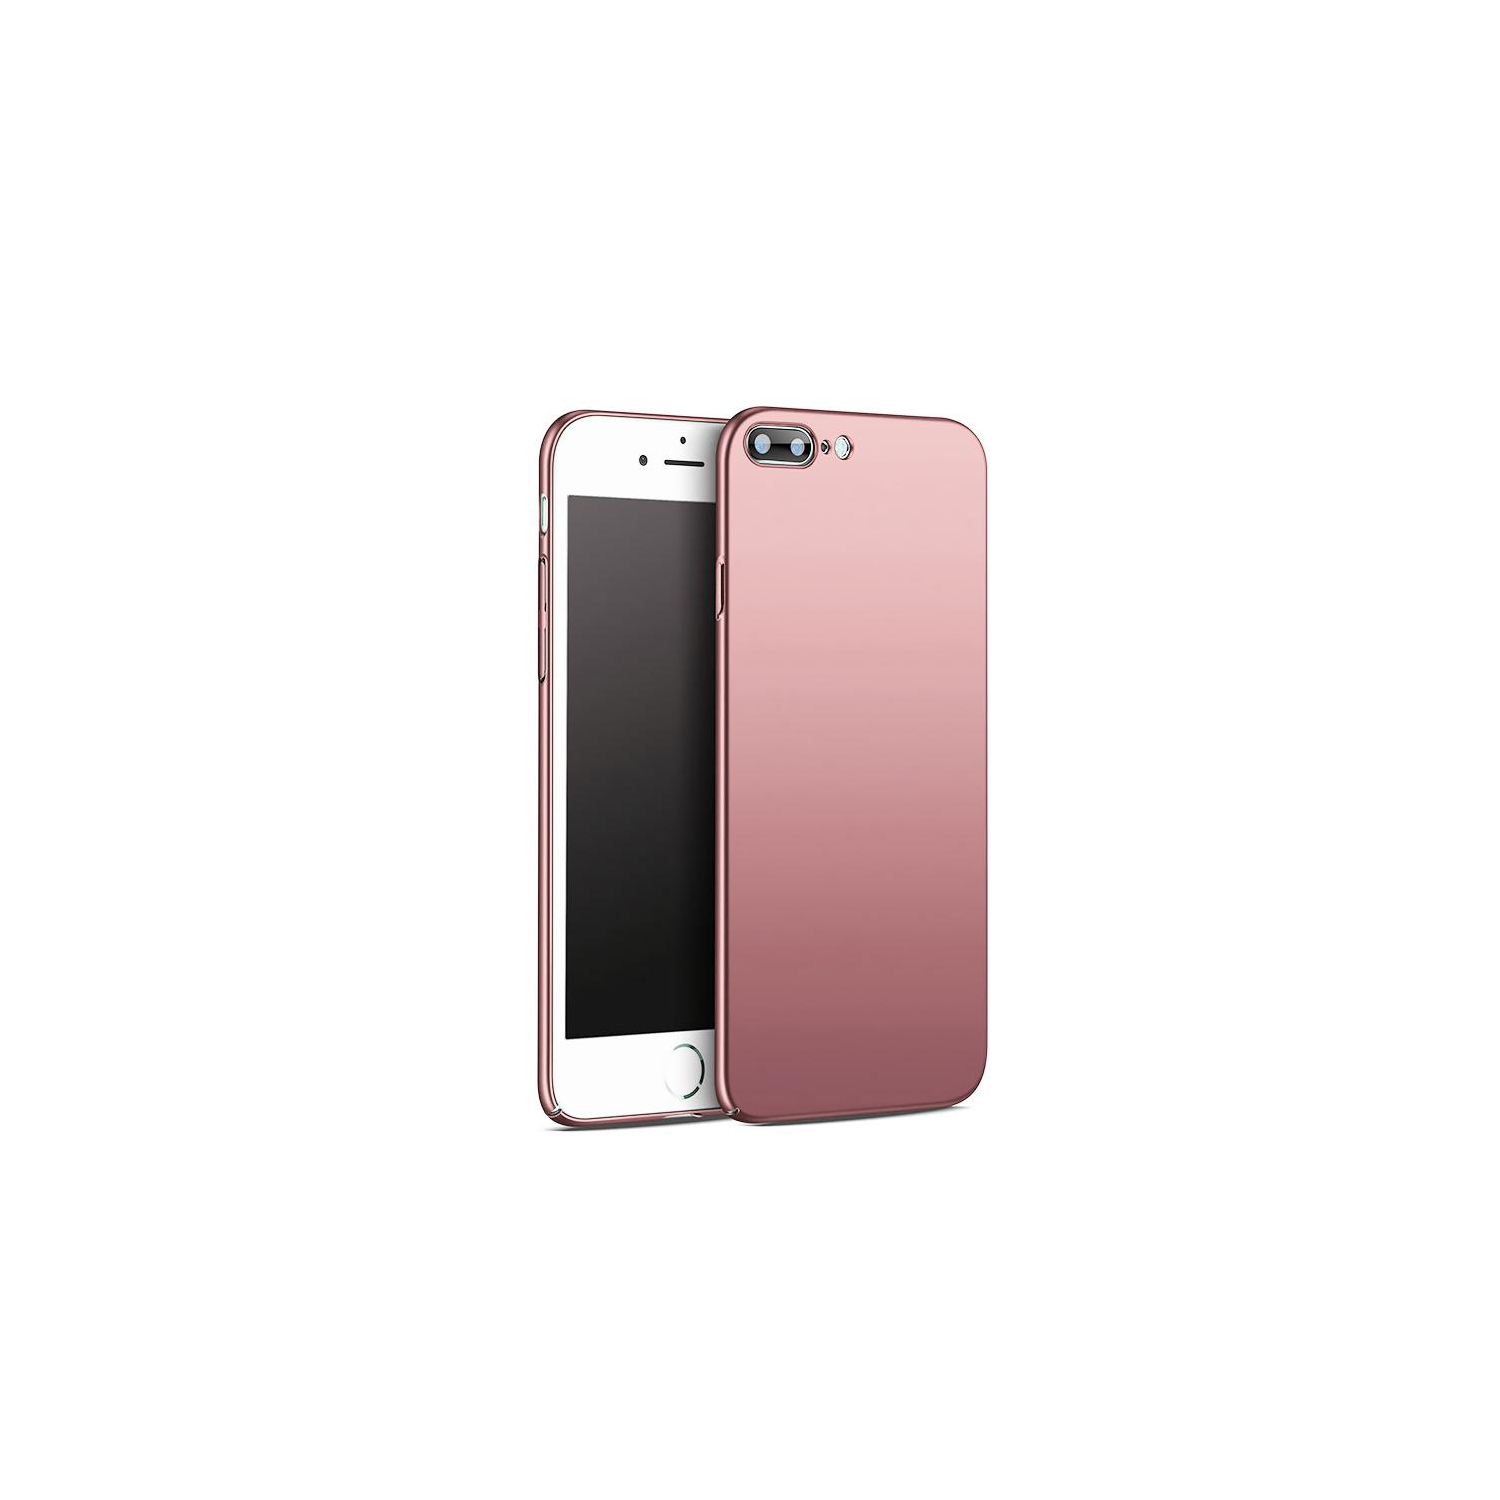 PANDACO Hard Shell Rose Gold Case for iPhone 7 Plus or iPhone 8 Plus